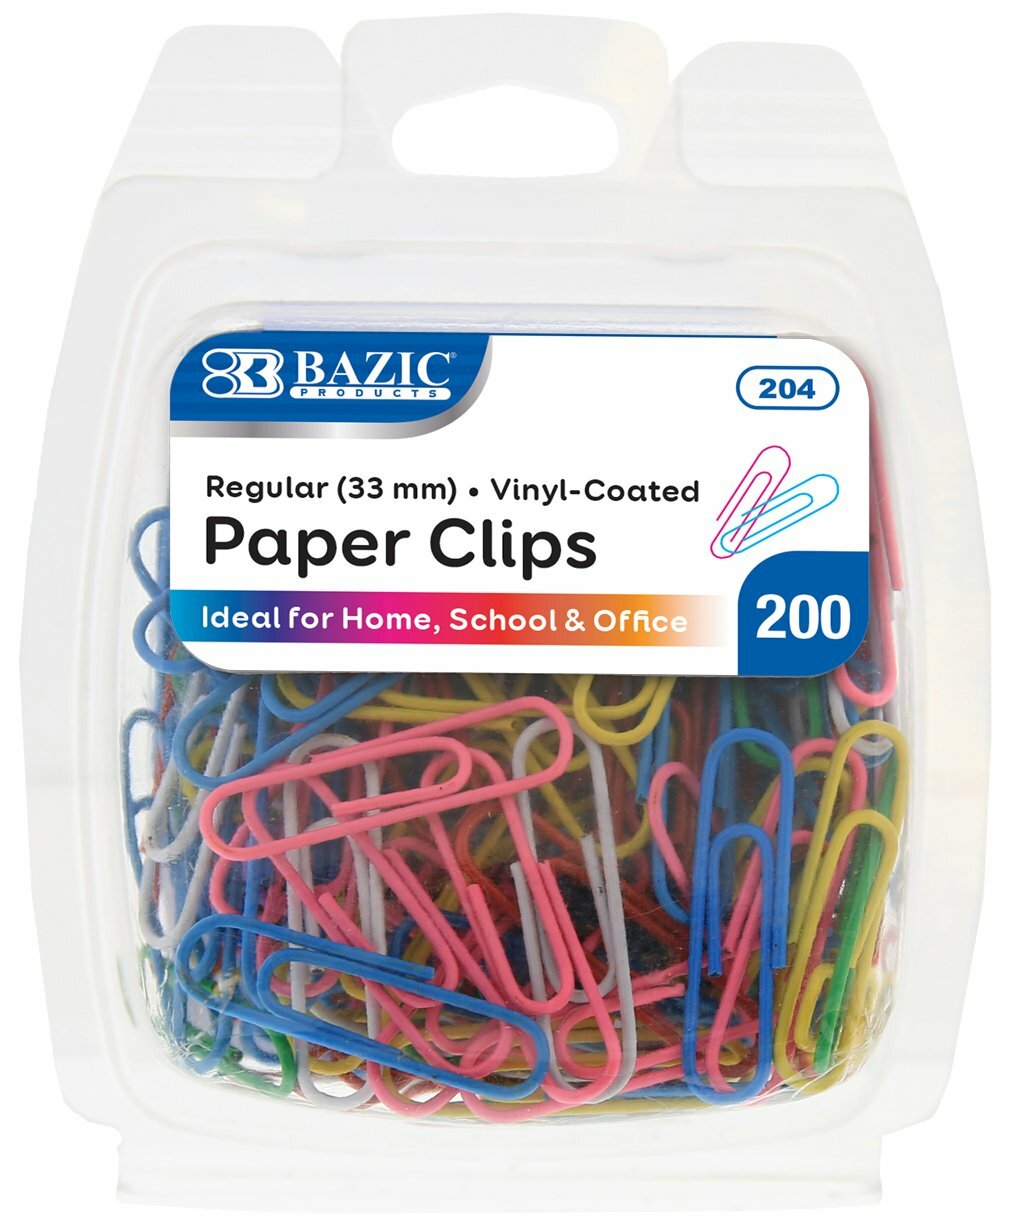 Paper Clips-Colors #1 (IN-6) (204)